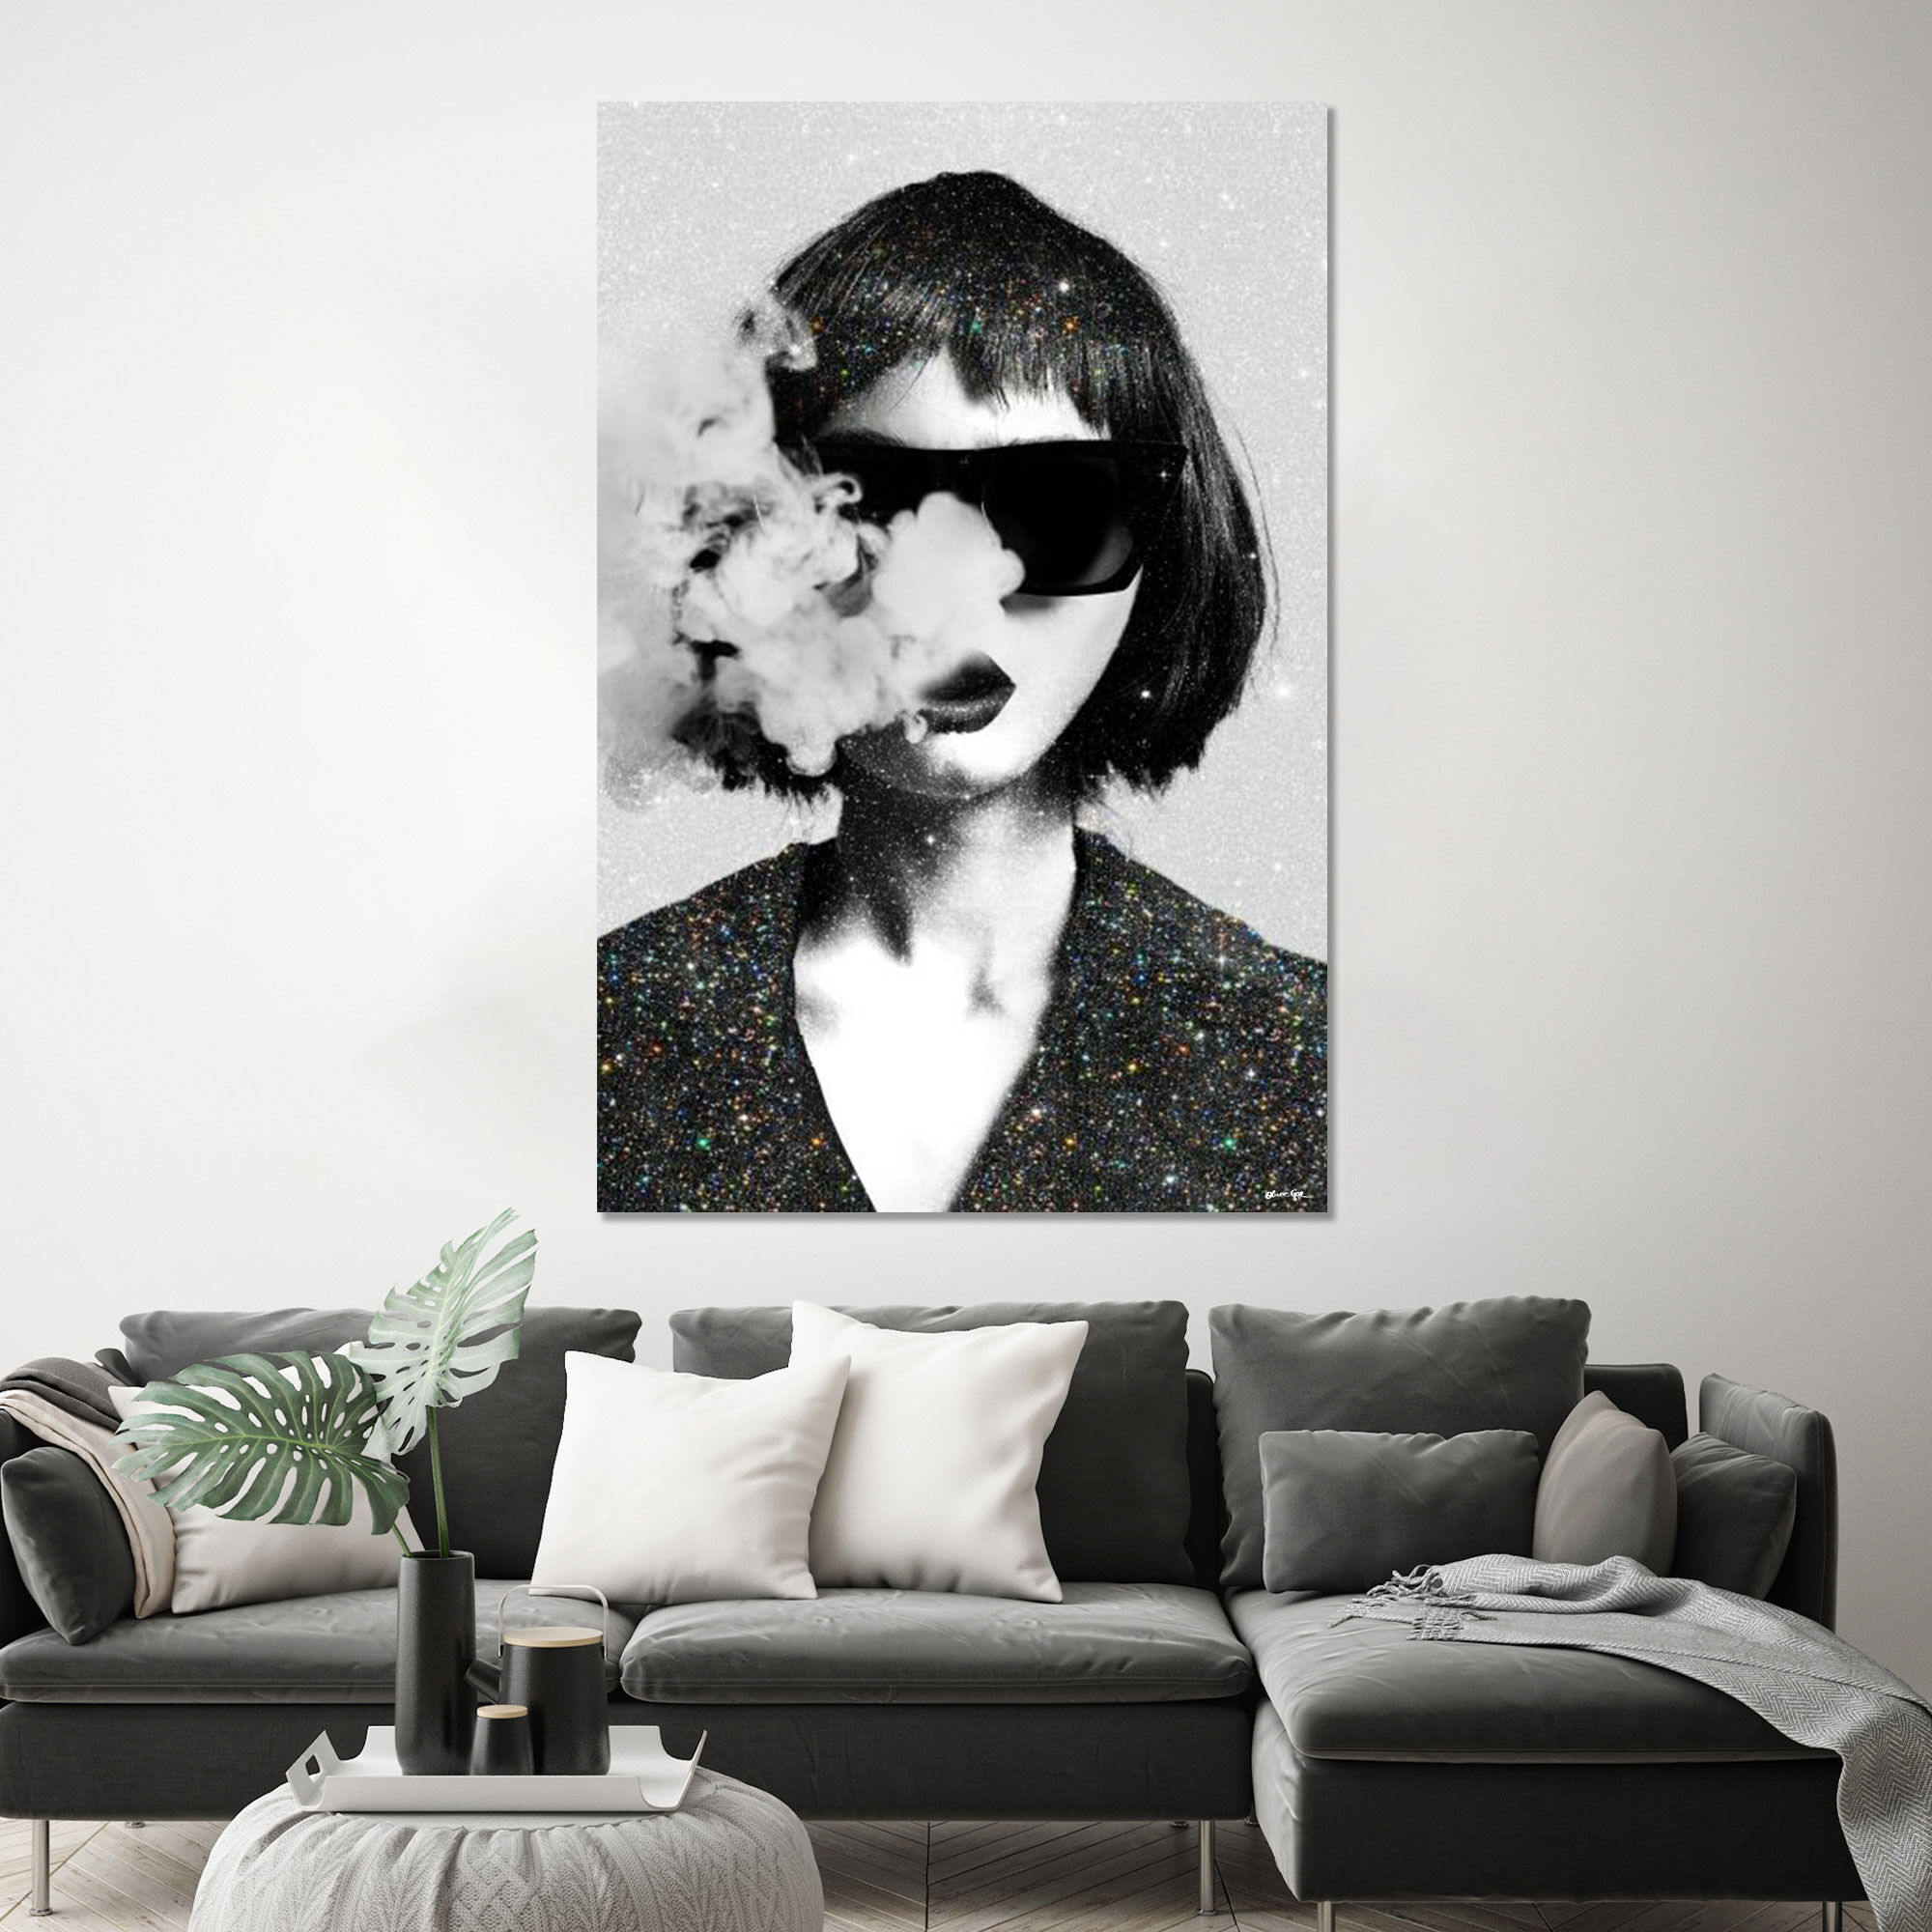 New & Trending Canvas Wall Art for Every Room | Oliver Gal